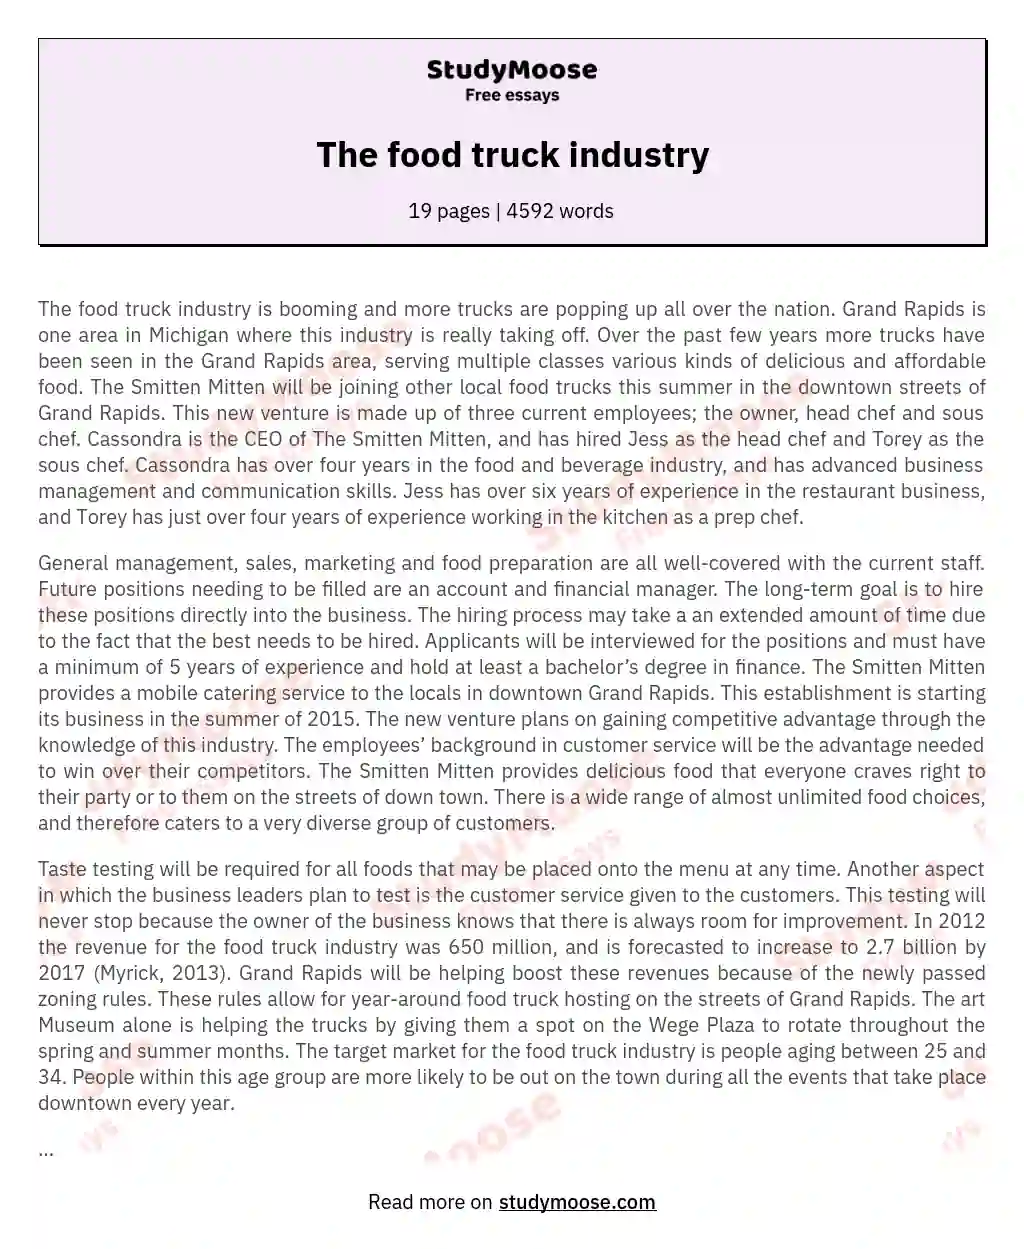 The food truck industry